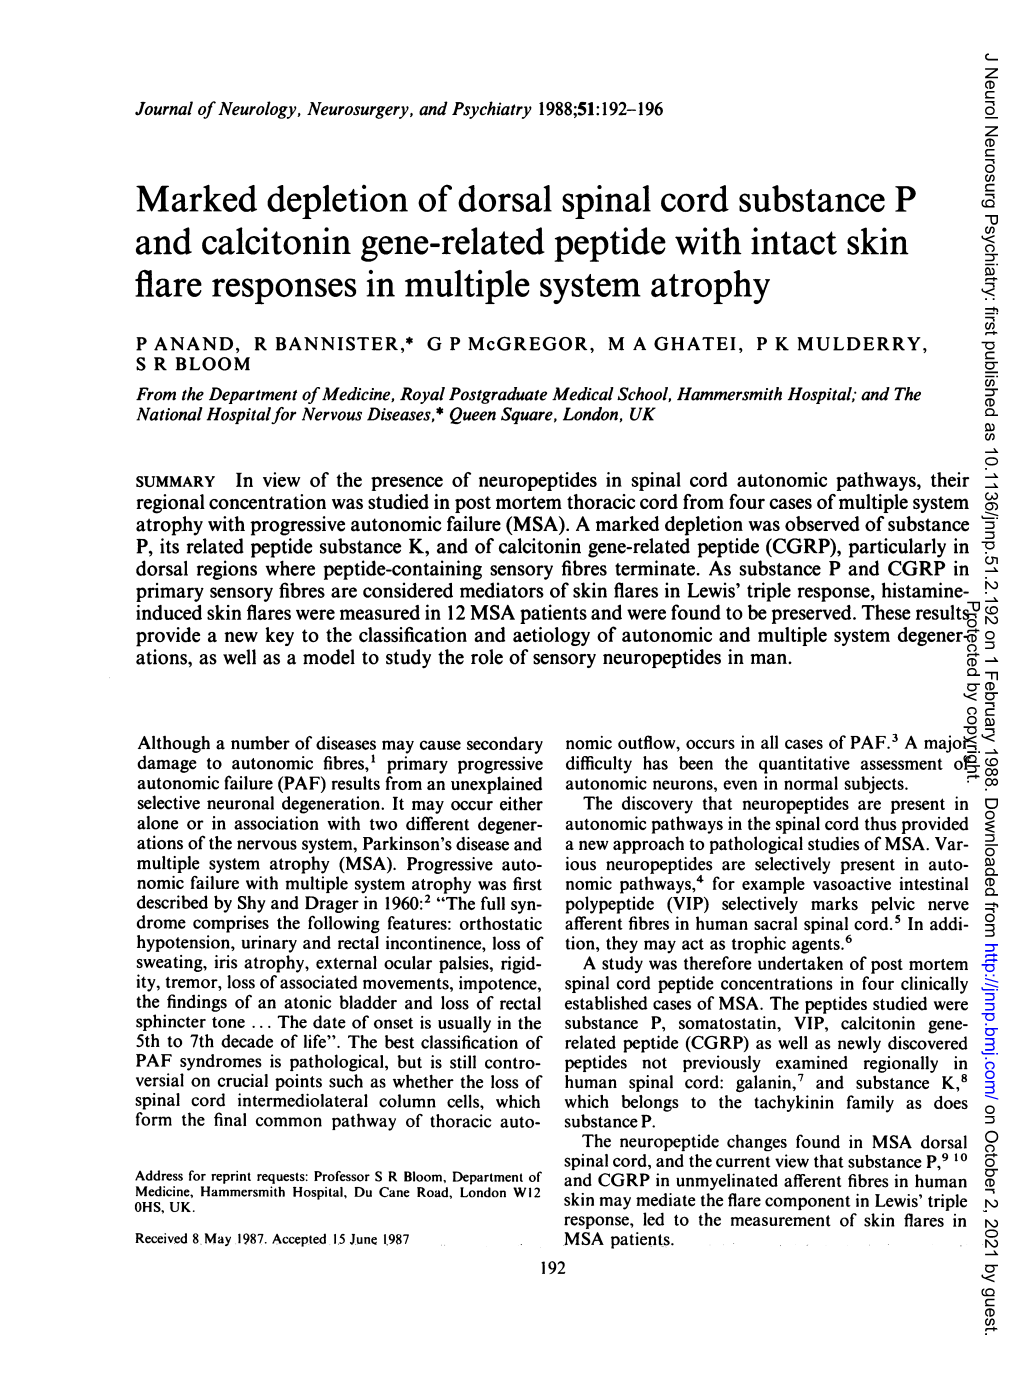 Marked Depletion of Dorsal Spinal Cord Substance P and Calcitonin Gene-Related Peptide with Intact Skin Flare Responses in Multiple System Atrophy